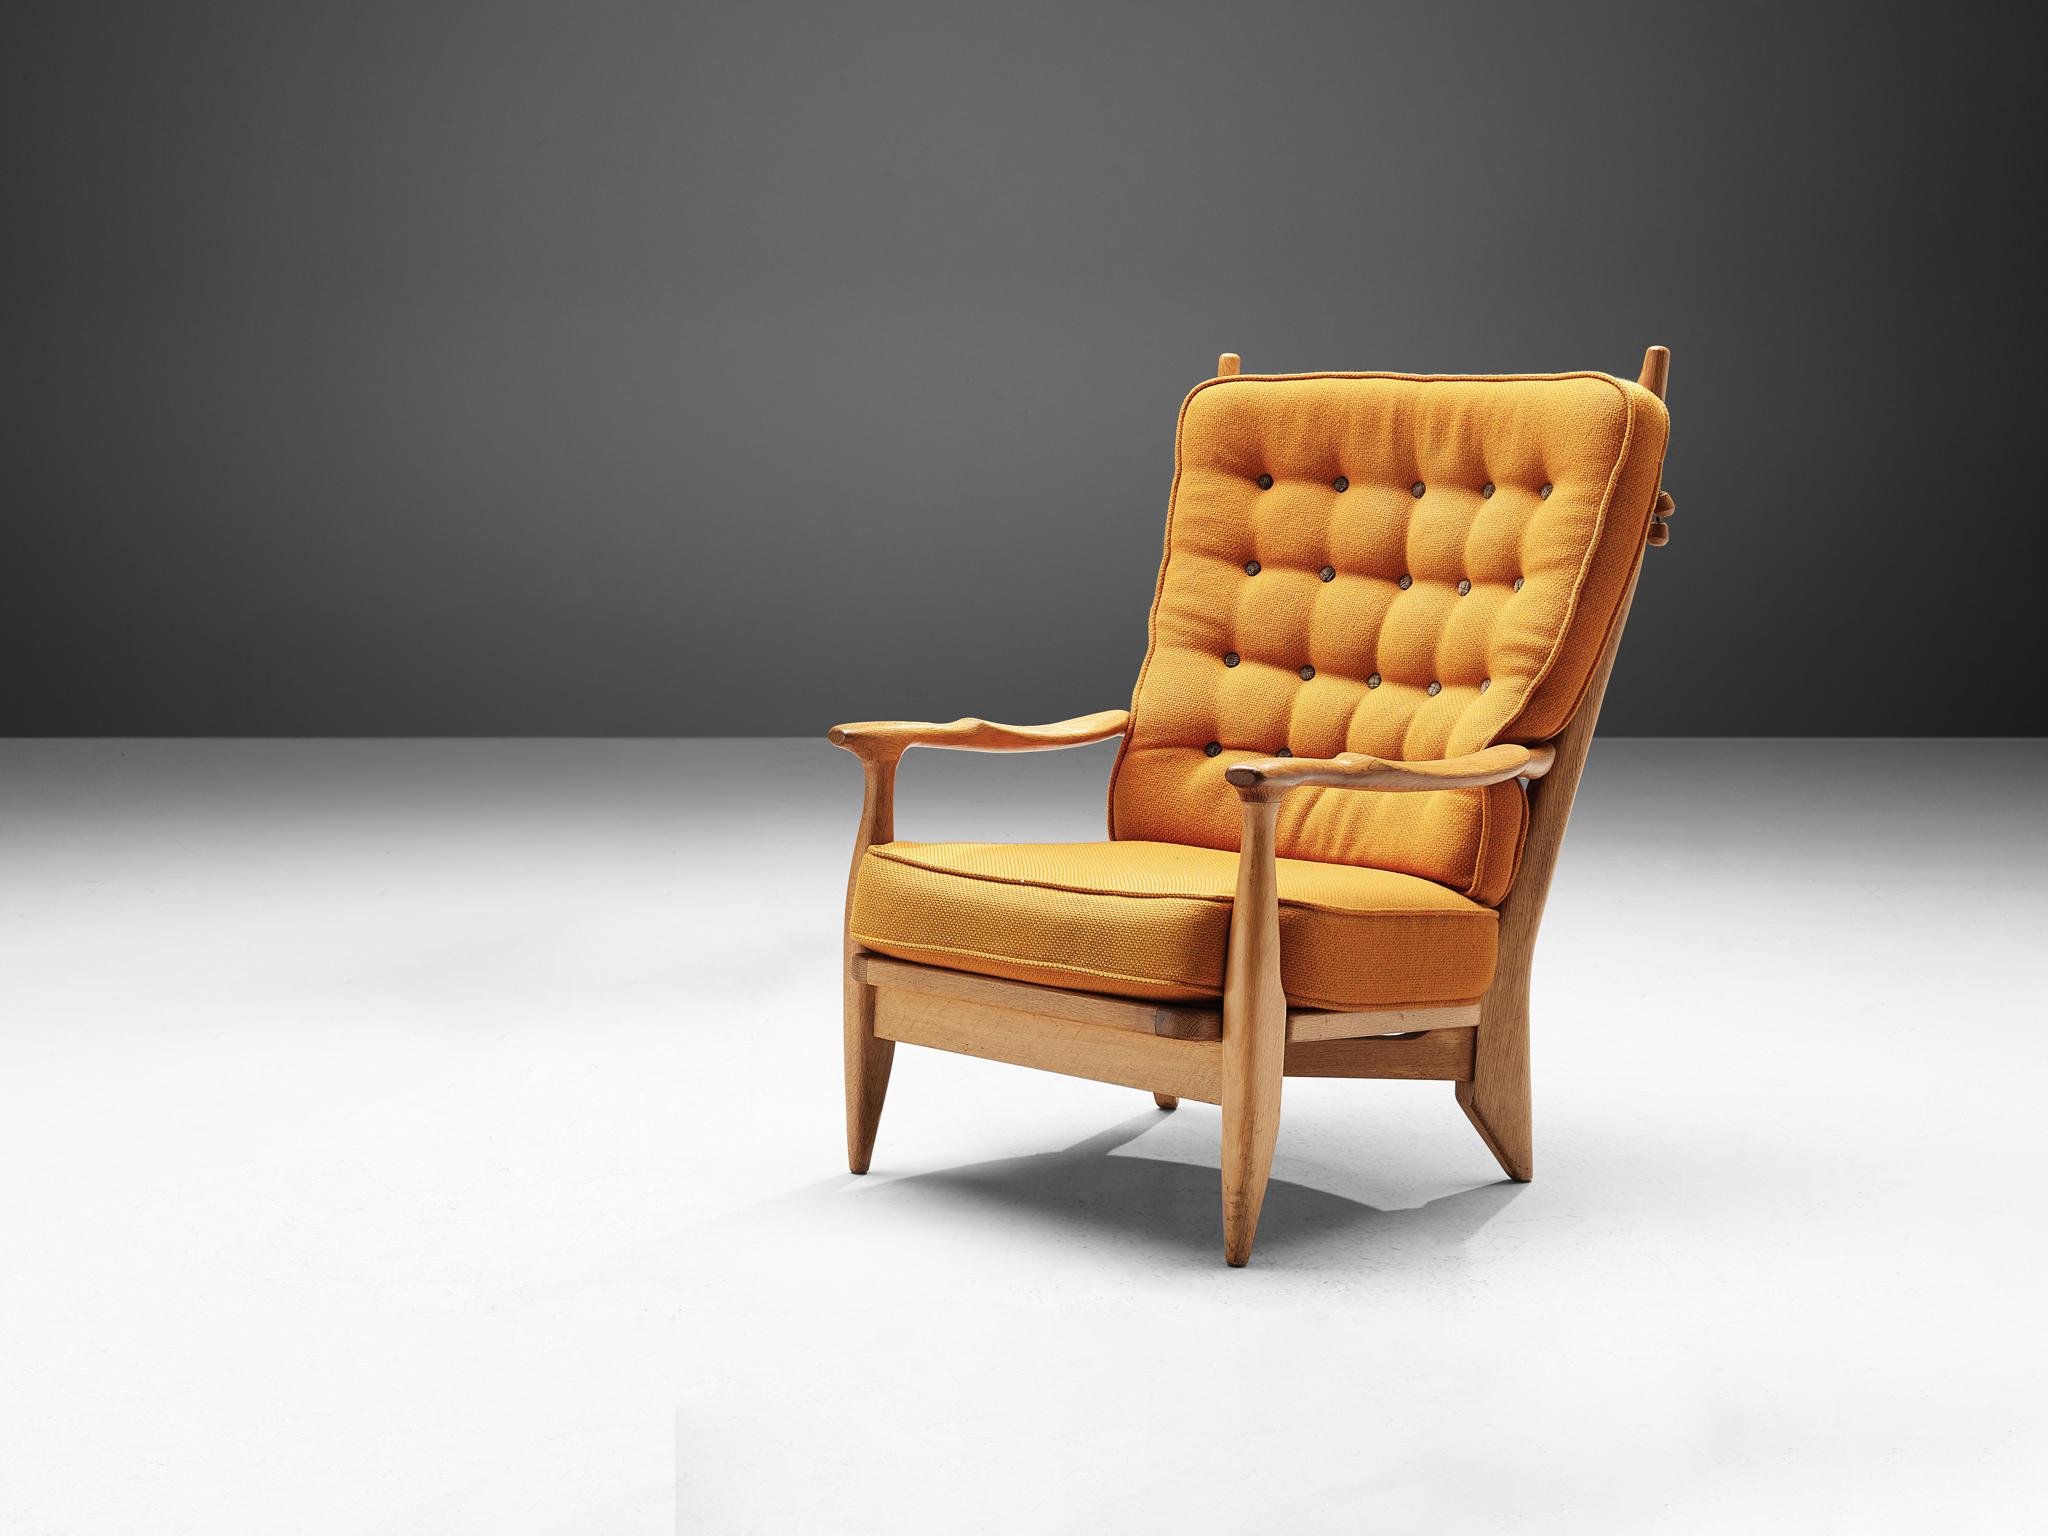 Guillerme et Chambron for Votre Maison, easy chair, oak, fabric, France, 1960s

Guillerme and Chambron are known for their high quality solid oak furniture, of which this armchair is another great example. This lounge chair has an interesting,